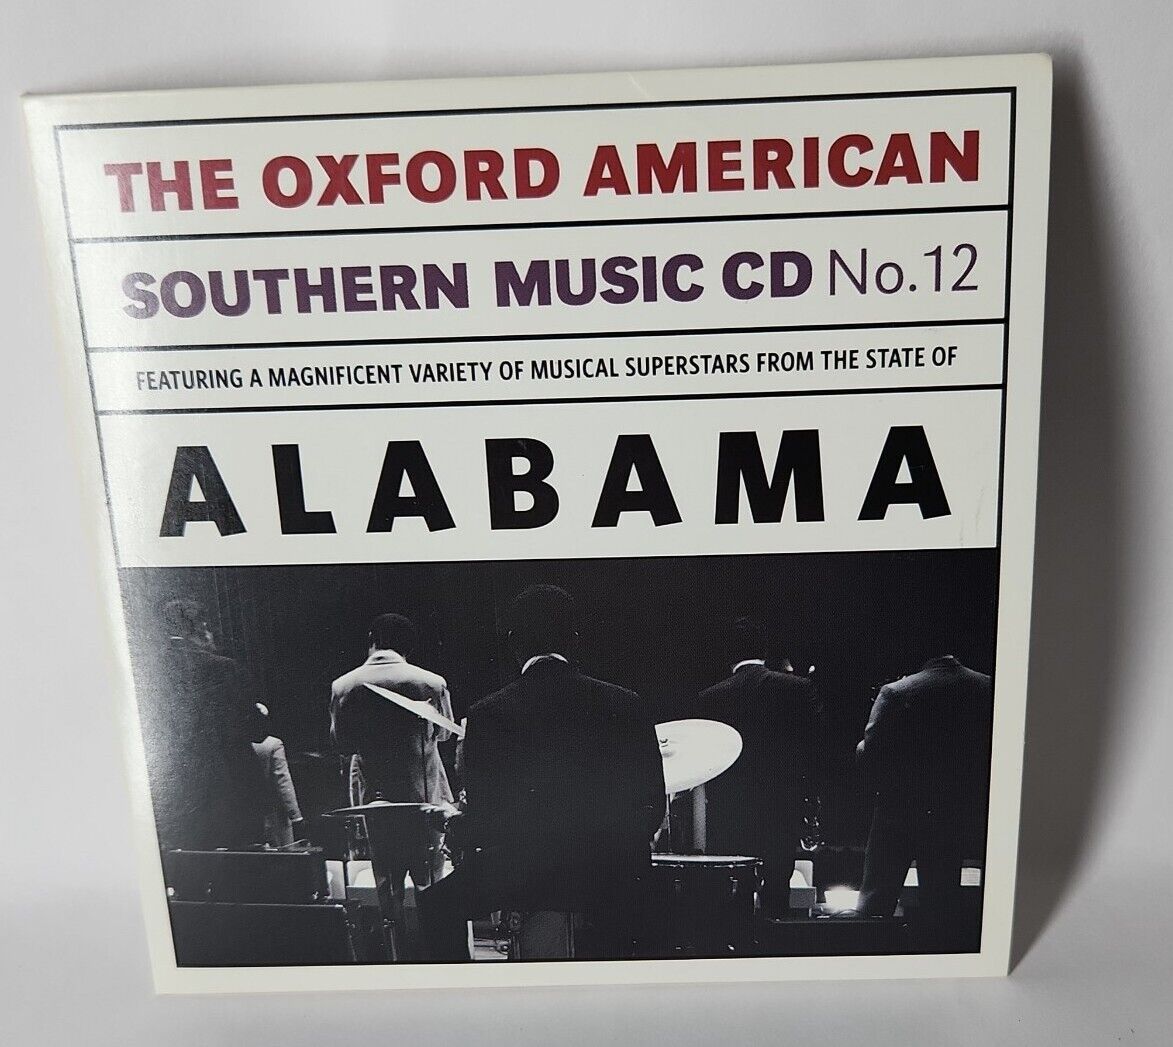 The Oxford American Southern Music No 12 Featuring The State Of Alabama CD 2010